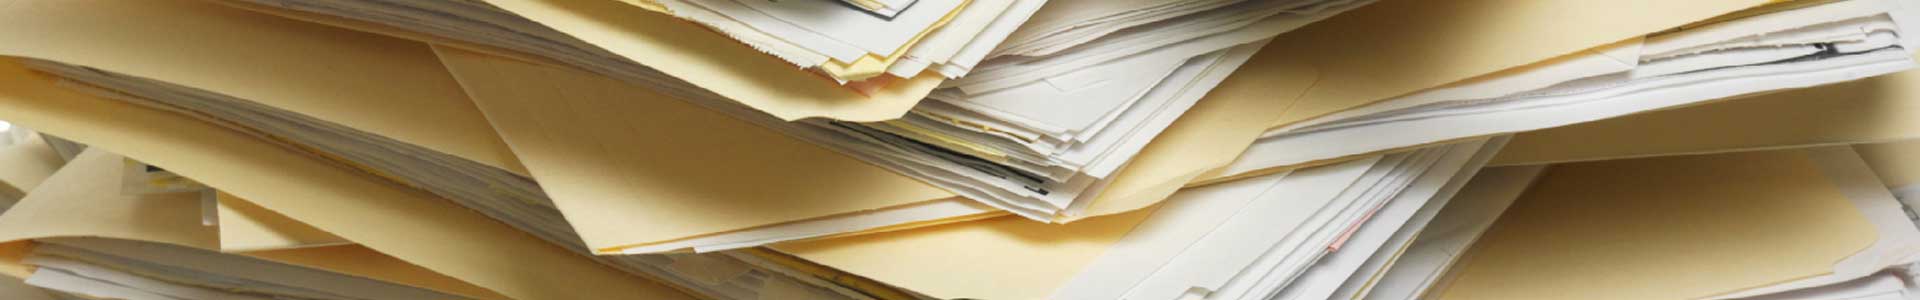 Document Scanning and Indexing